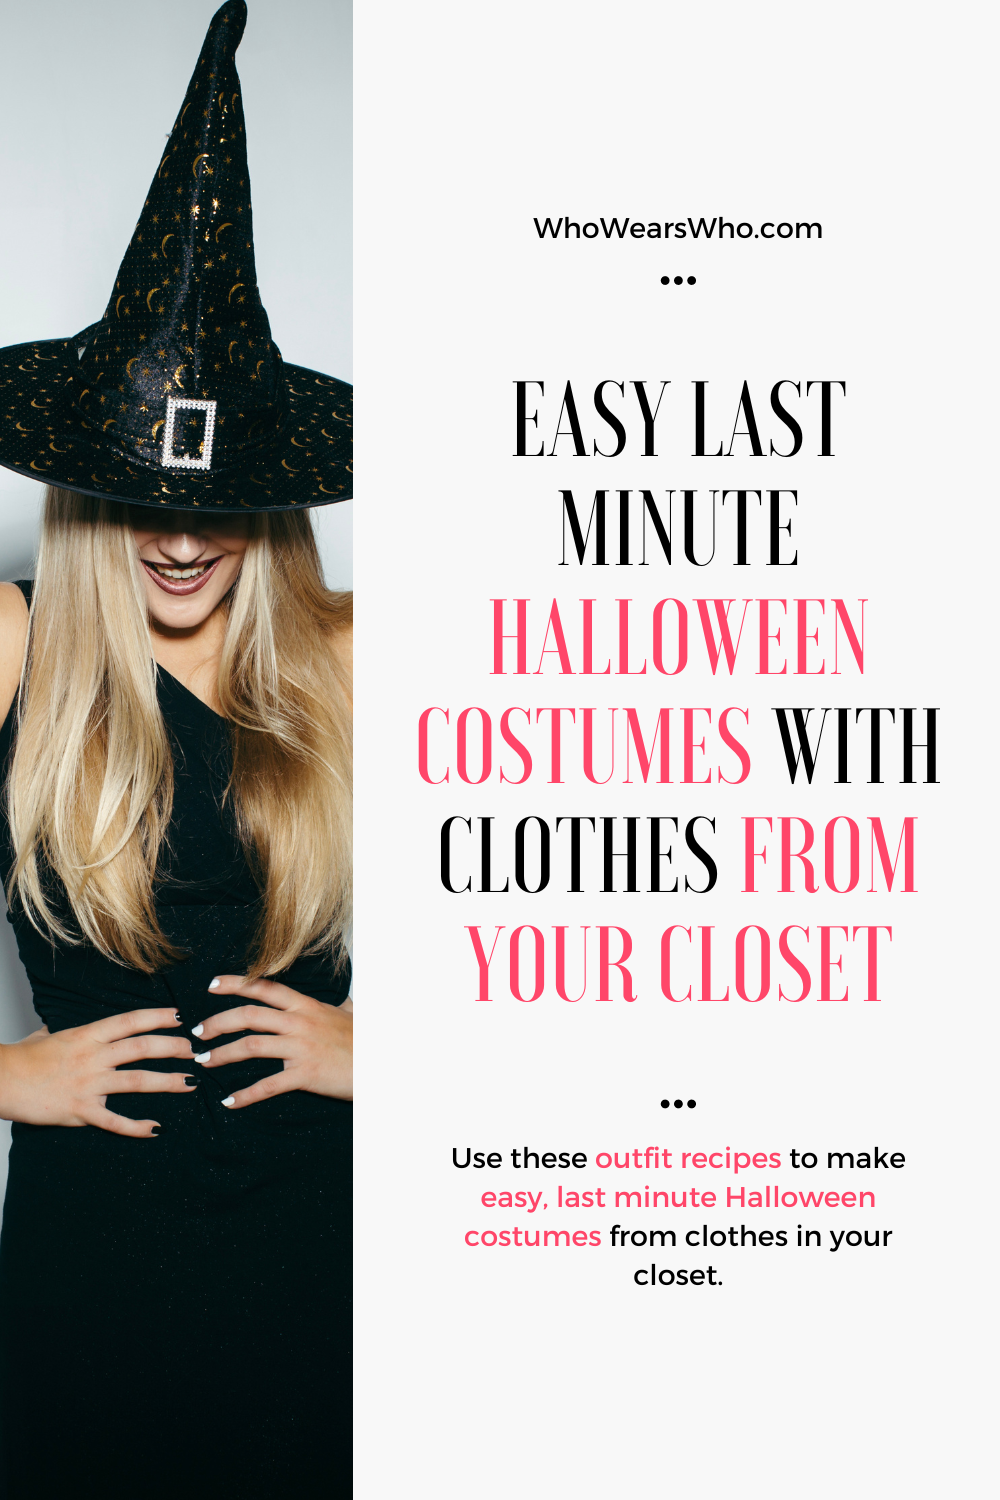 Easy last minute Halloween costumes with clothes from your closet